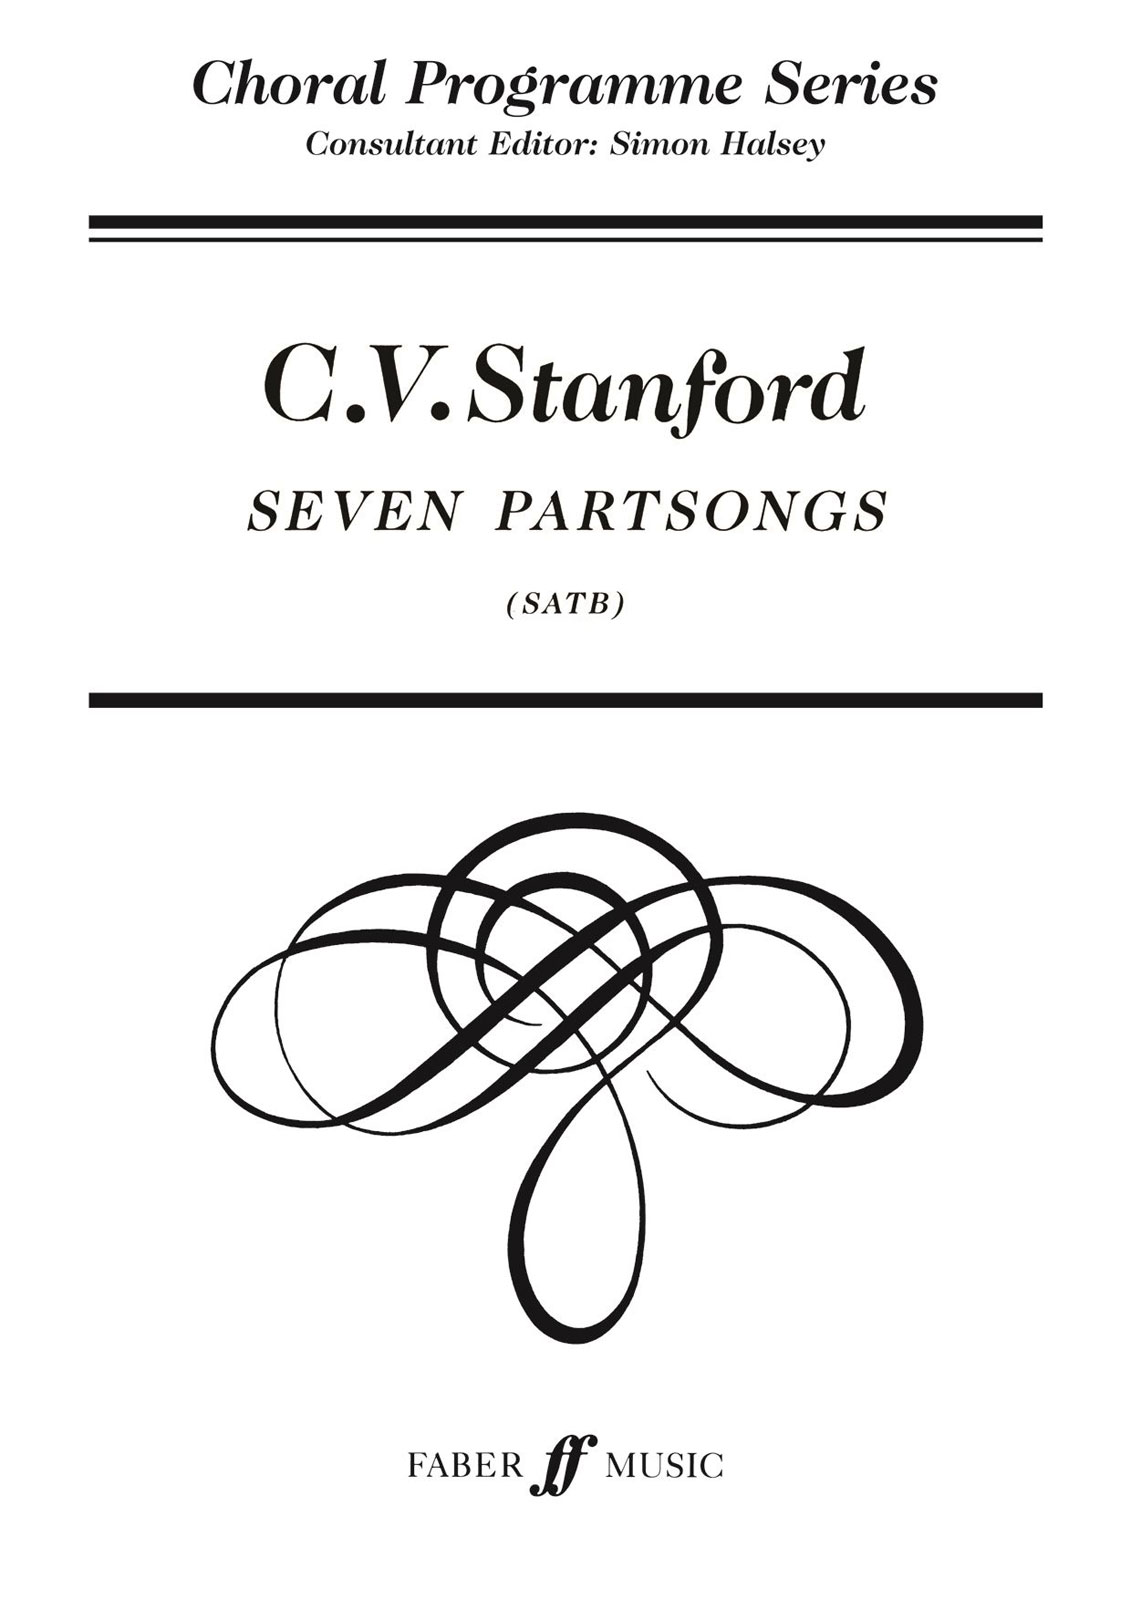 FABER MUSIC STANFORD CHARLES - SEVEN PARTSONGS - MIXED VOICES (PER 10 MINIMUM)